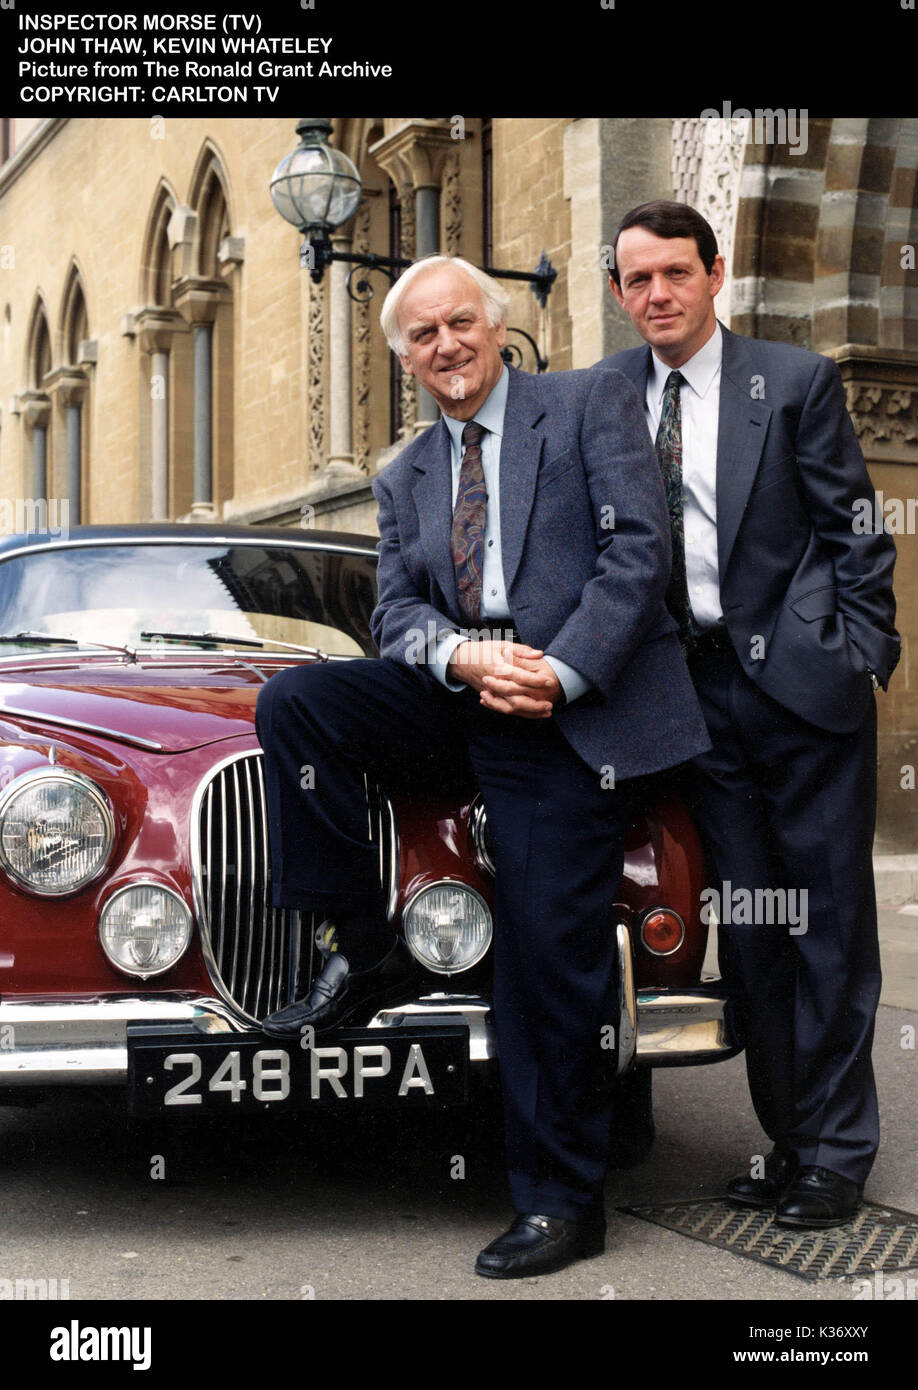 INSPECTOR MORSE JOHN THAW, KEVIN WHATELEY Stock Photo